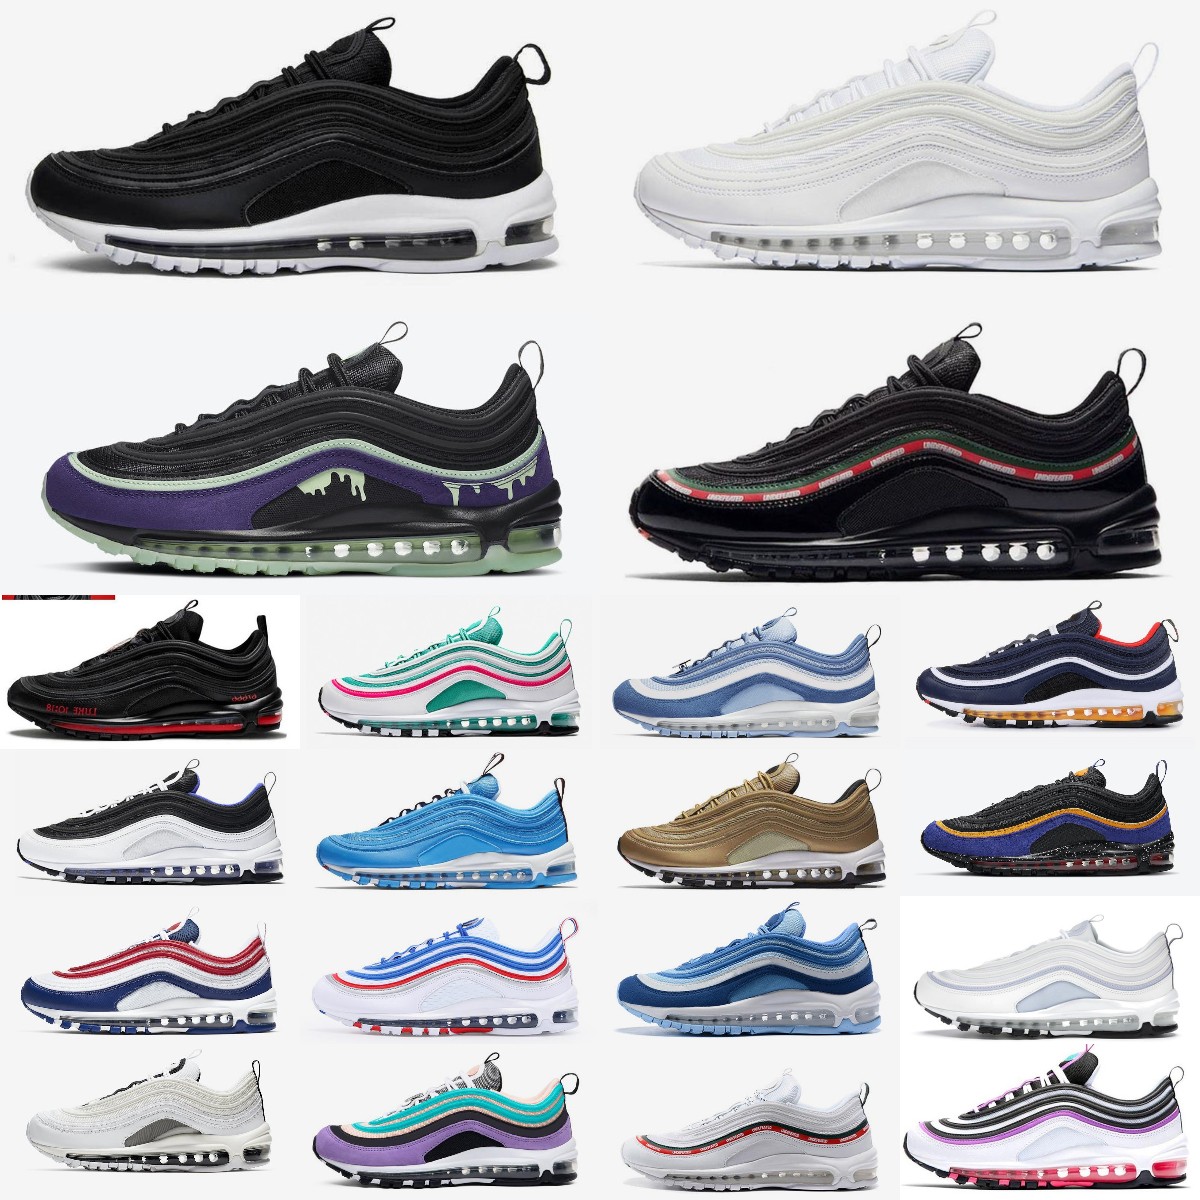 

NEW Running Shoes 97S Trainers Sports Sneakers Red Black Triple White Reflective Bred Game Royal Bullet Silver Aurora New 97 Og Classic Men Women Zoom Size 36-45, Box